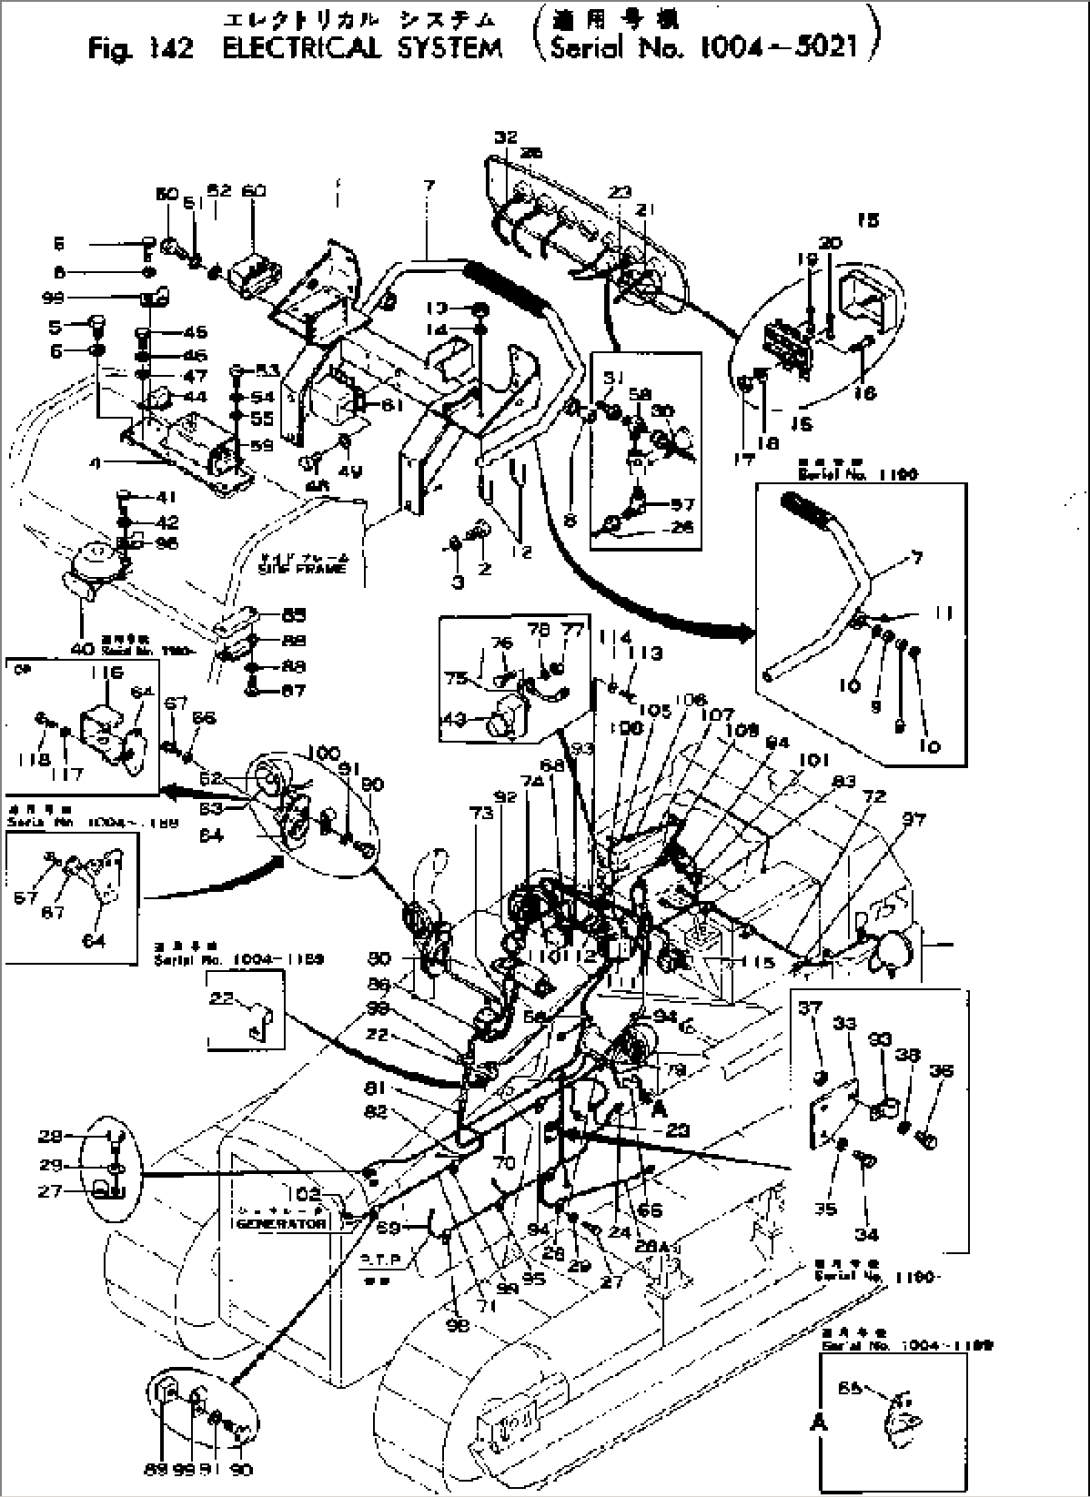 ELECTRICAL SYSTEM(#1004-5021)